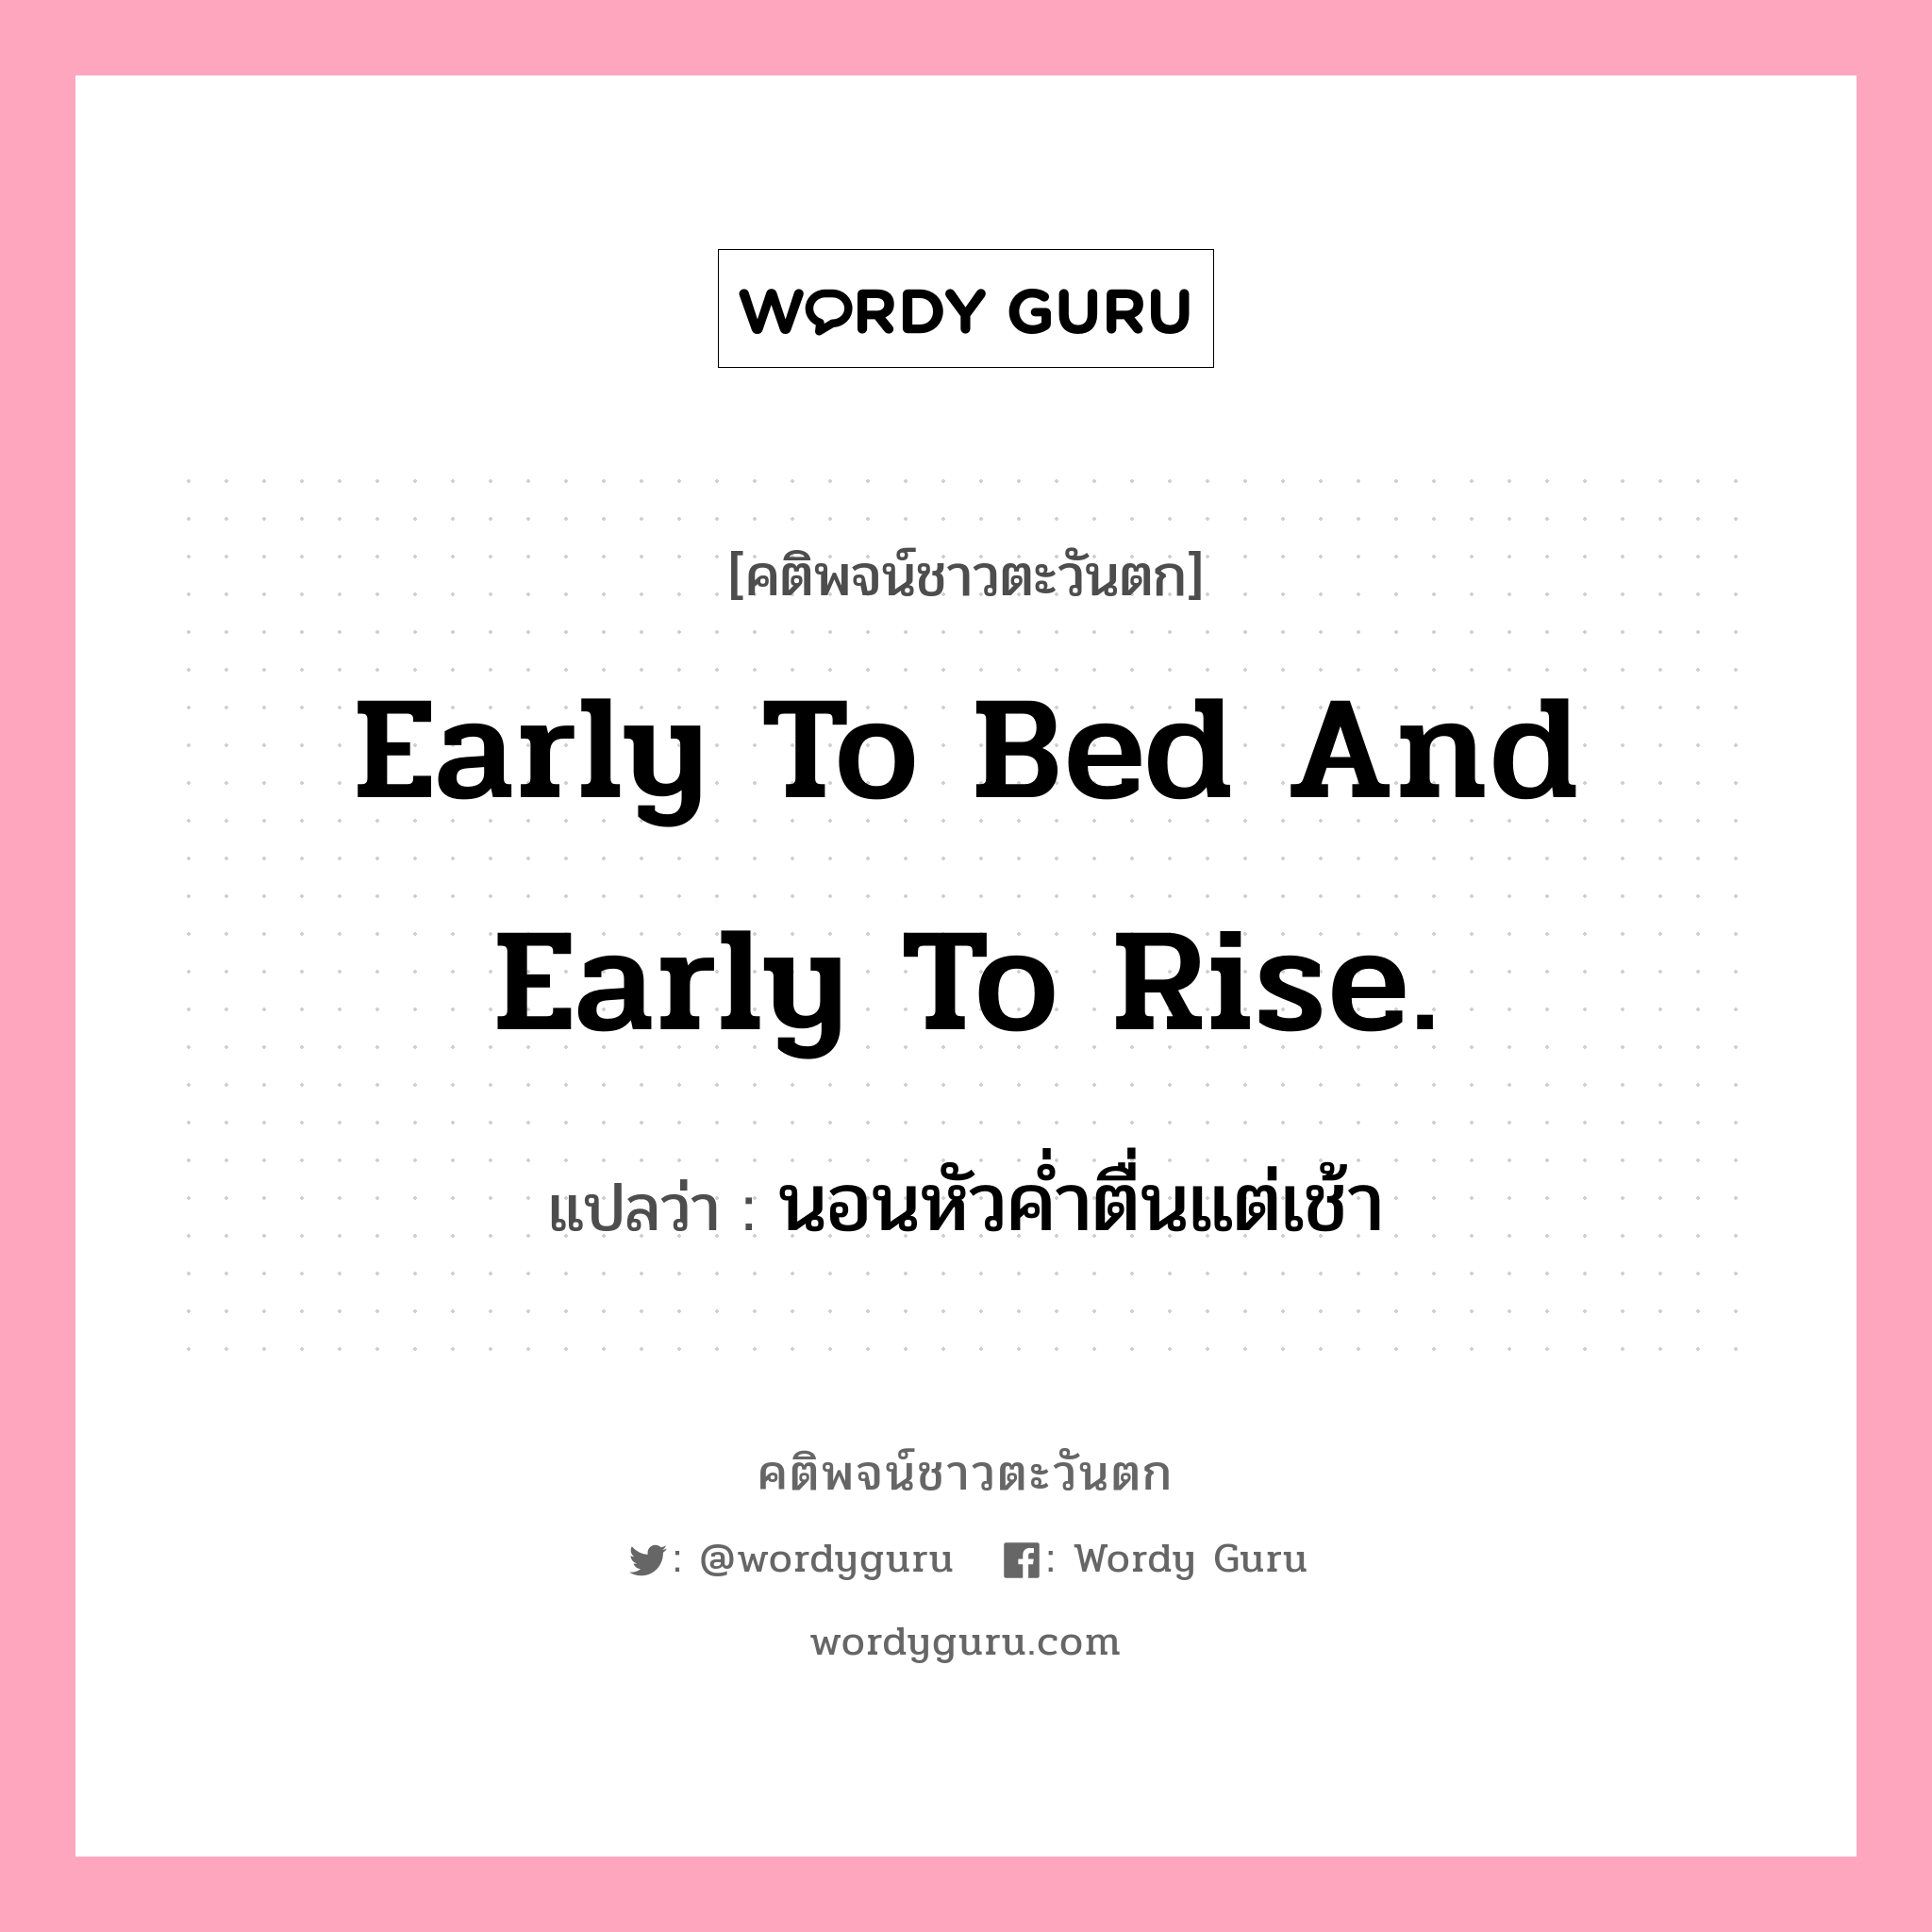 Early to bed and early to rise., คติพจน์ชาวตะวันตก Early to bed and early to rise. แปลว่า นอนหัวค่ำตื่นแต่เช้า